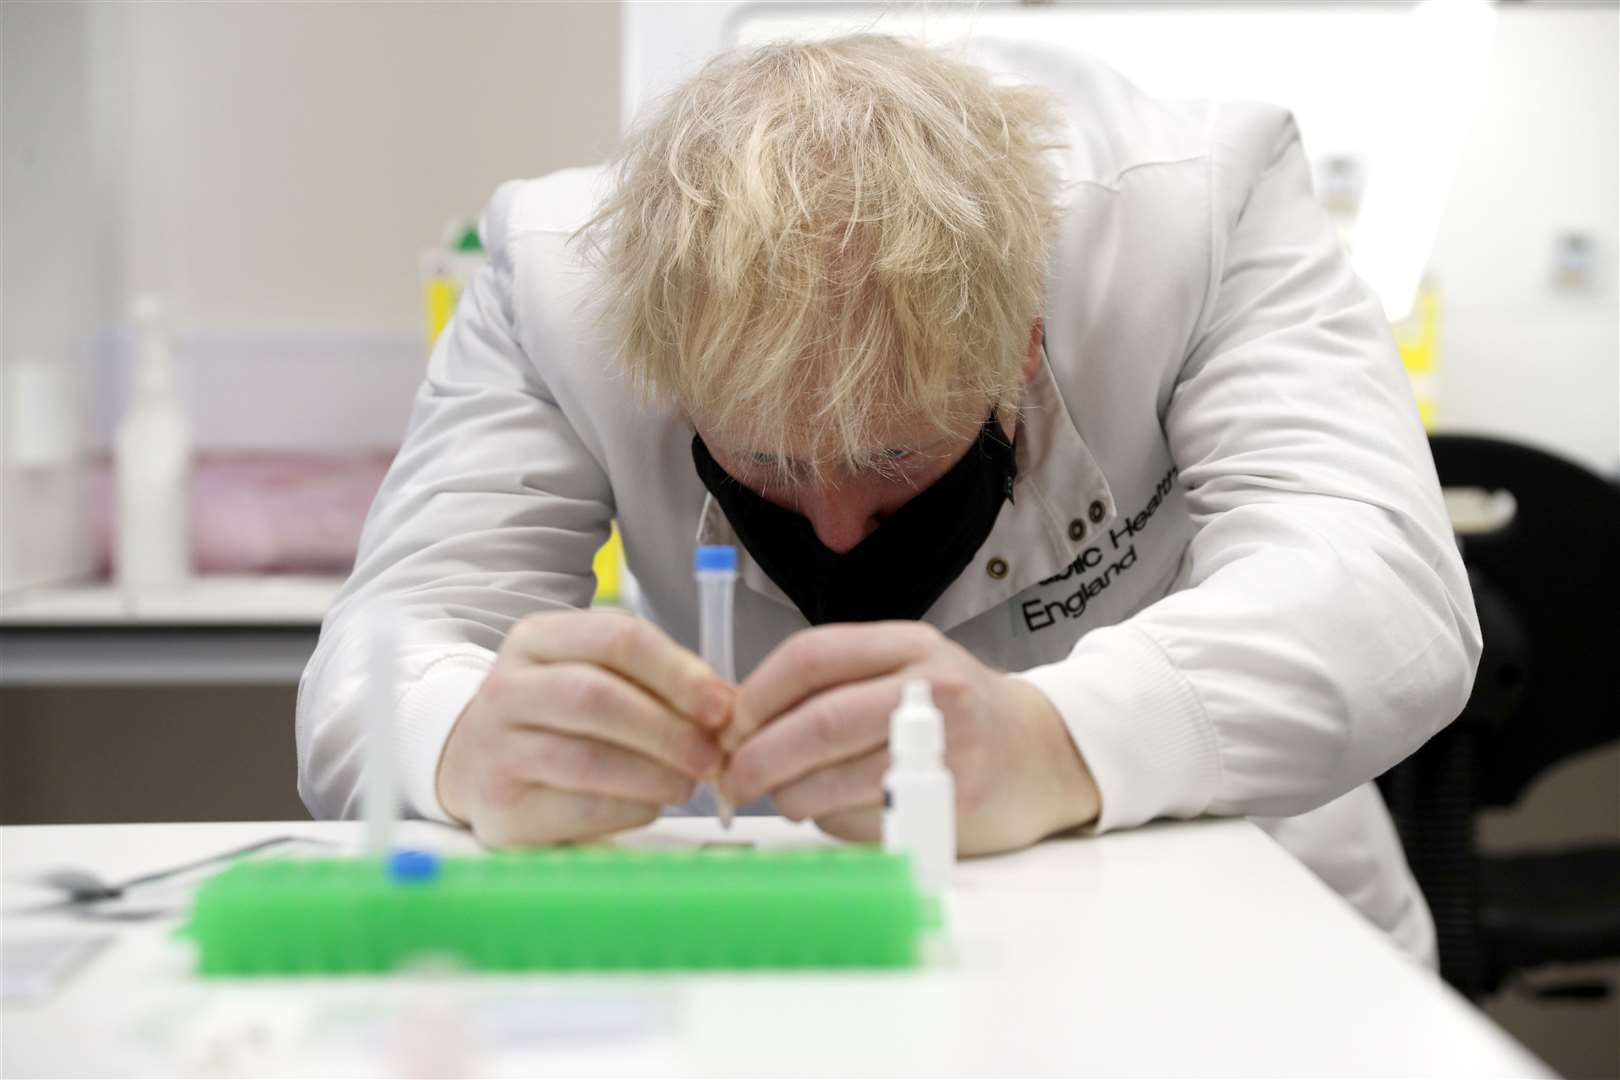 Boris Johnson visits Public Health England’s lateral flow testing laboratory at Porton Down in Wiltshire (Adrian Dennis/PA)